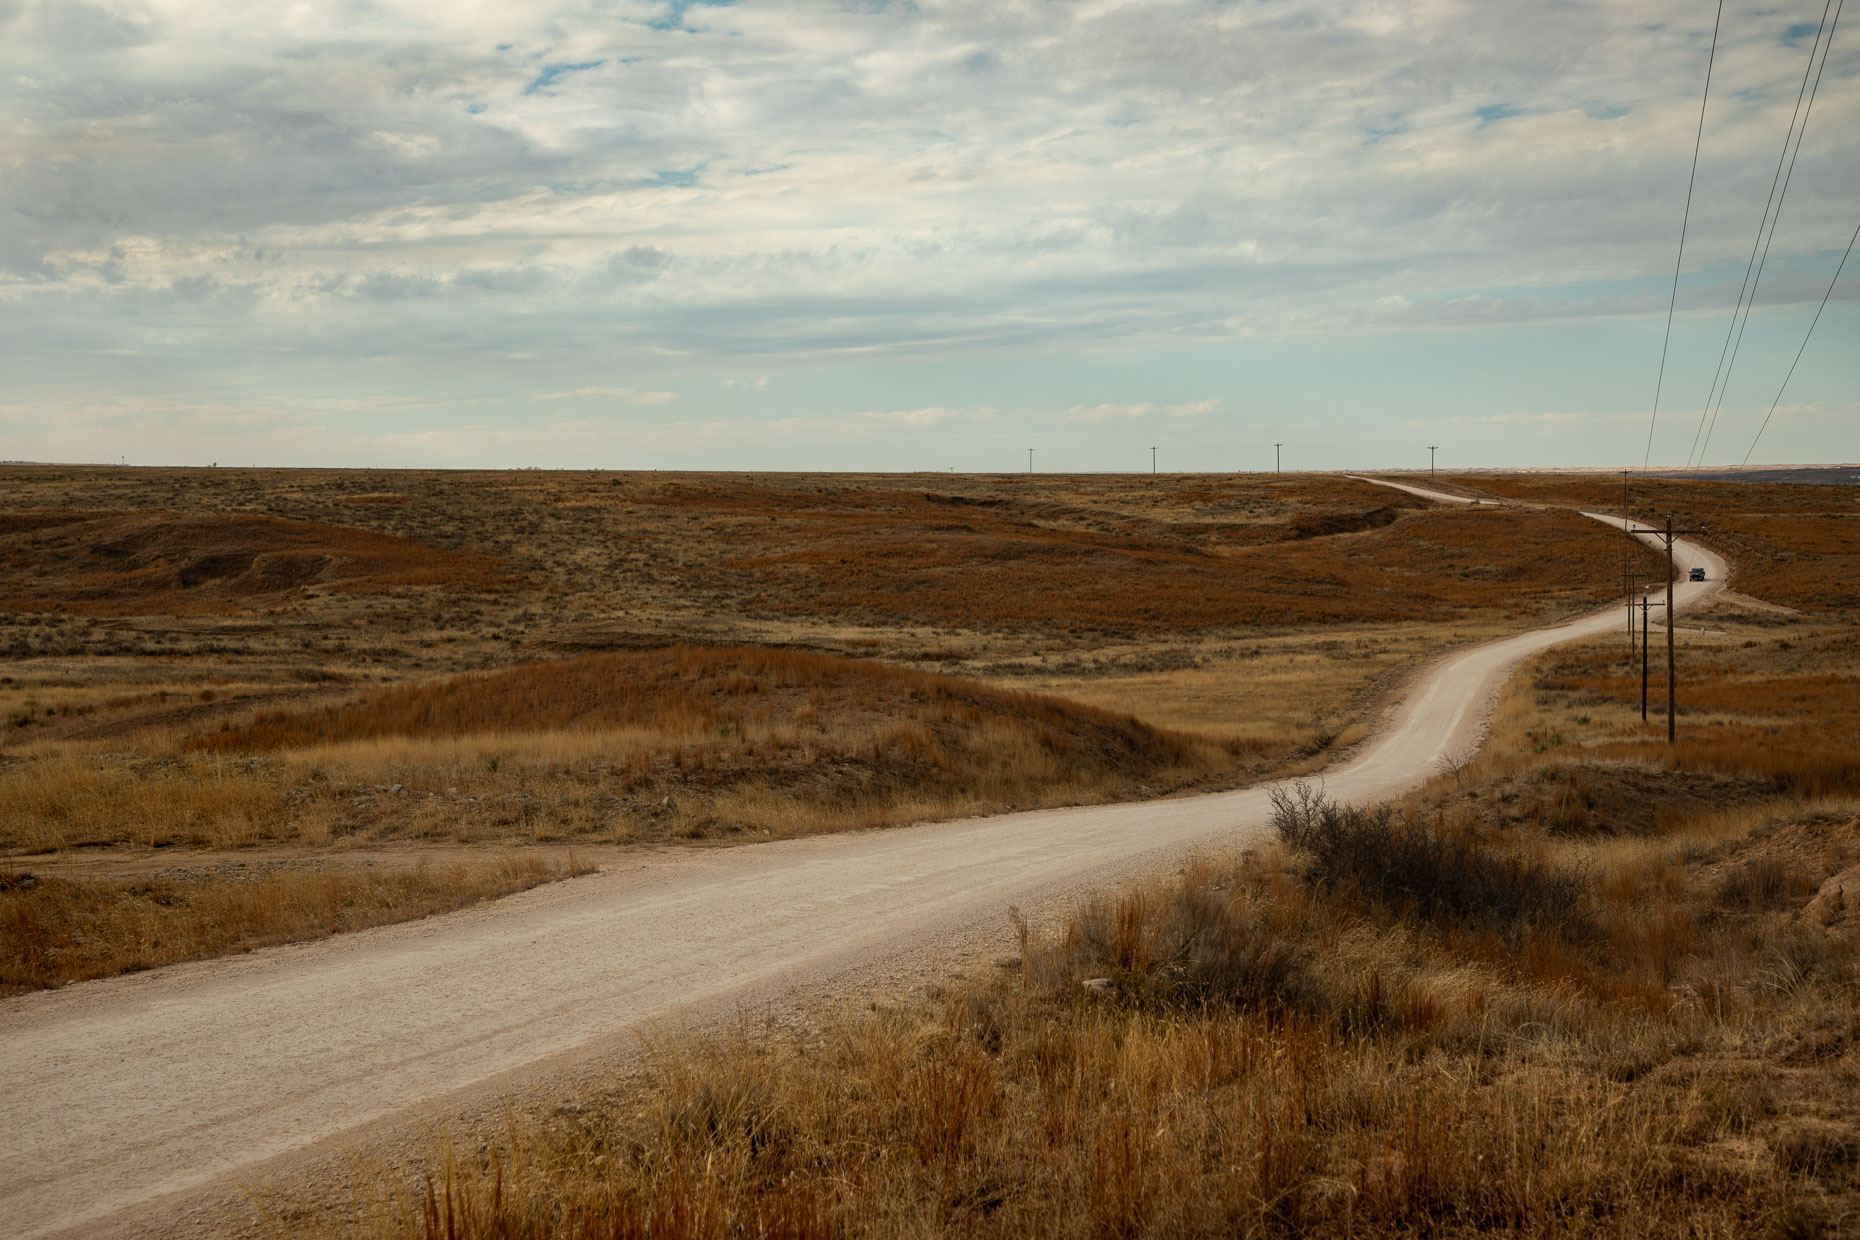 Winding road outside of Canadian, Texas for The New York Times. Brett Deering